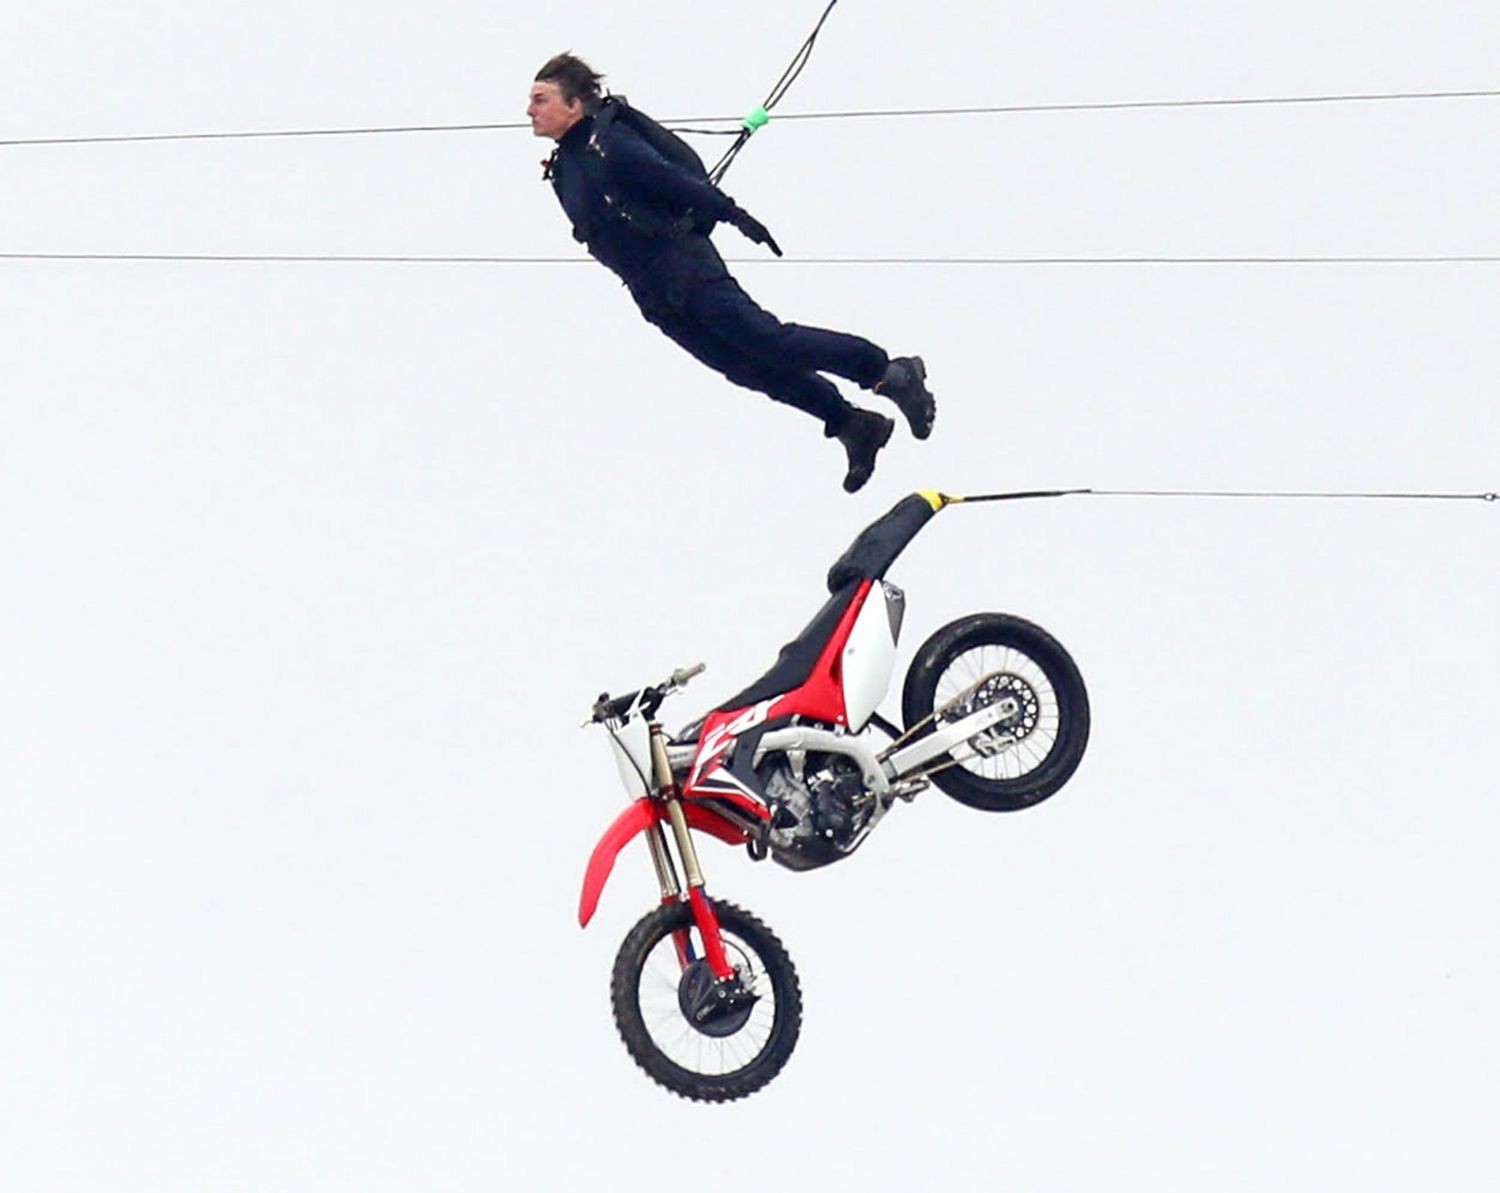 Tom Cruise on the sets of Mission: Impossible 7